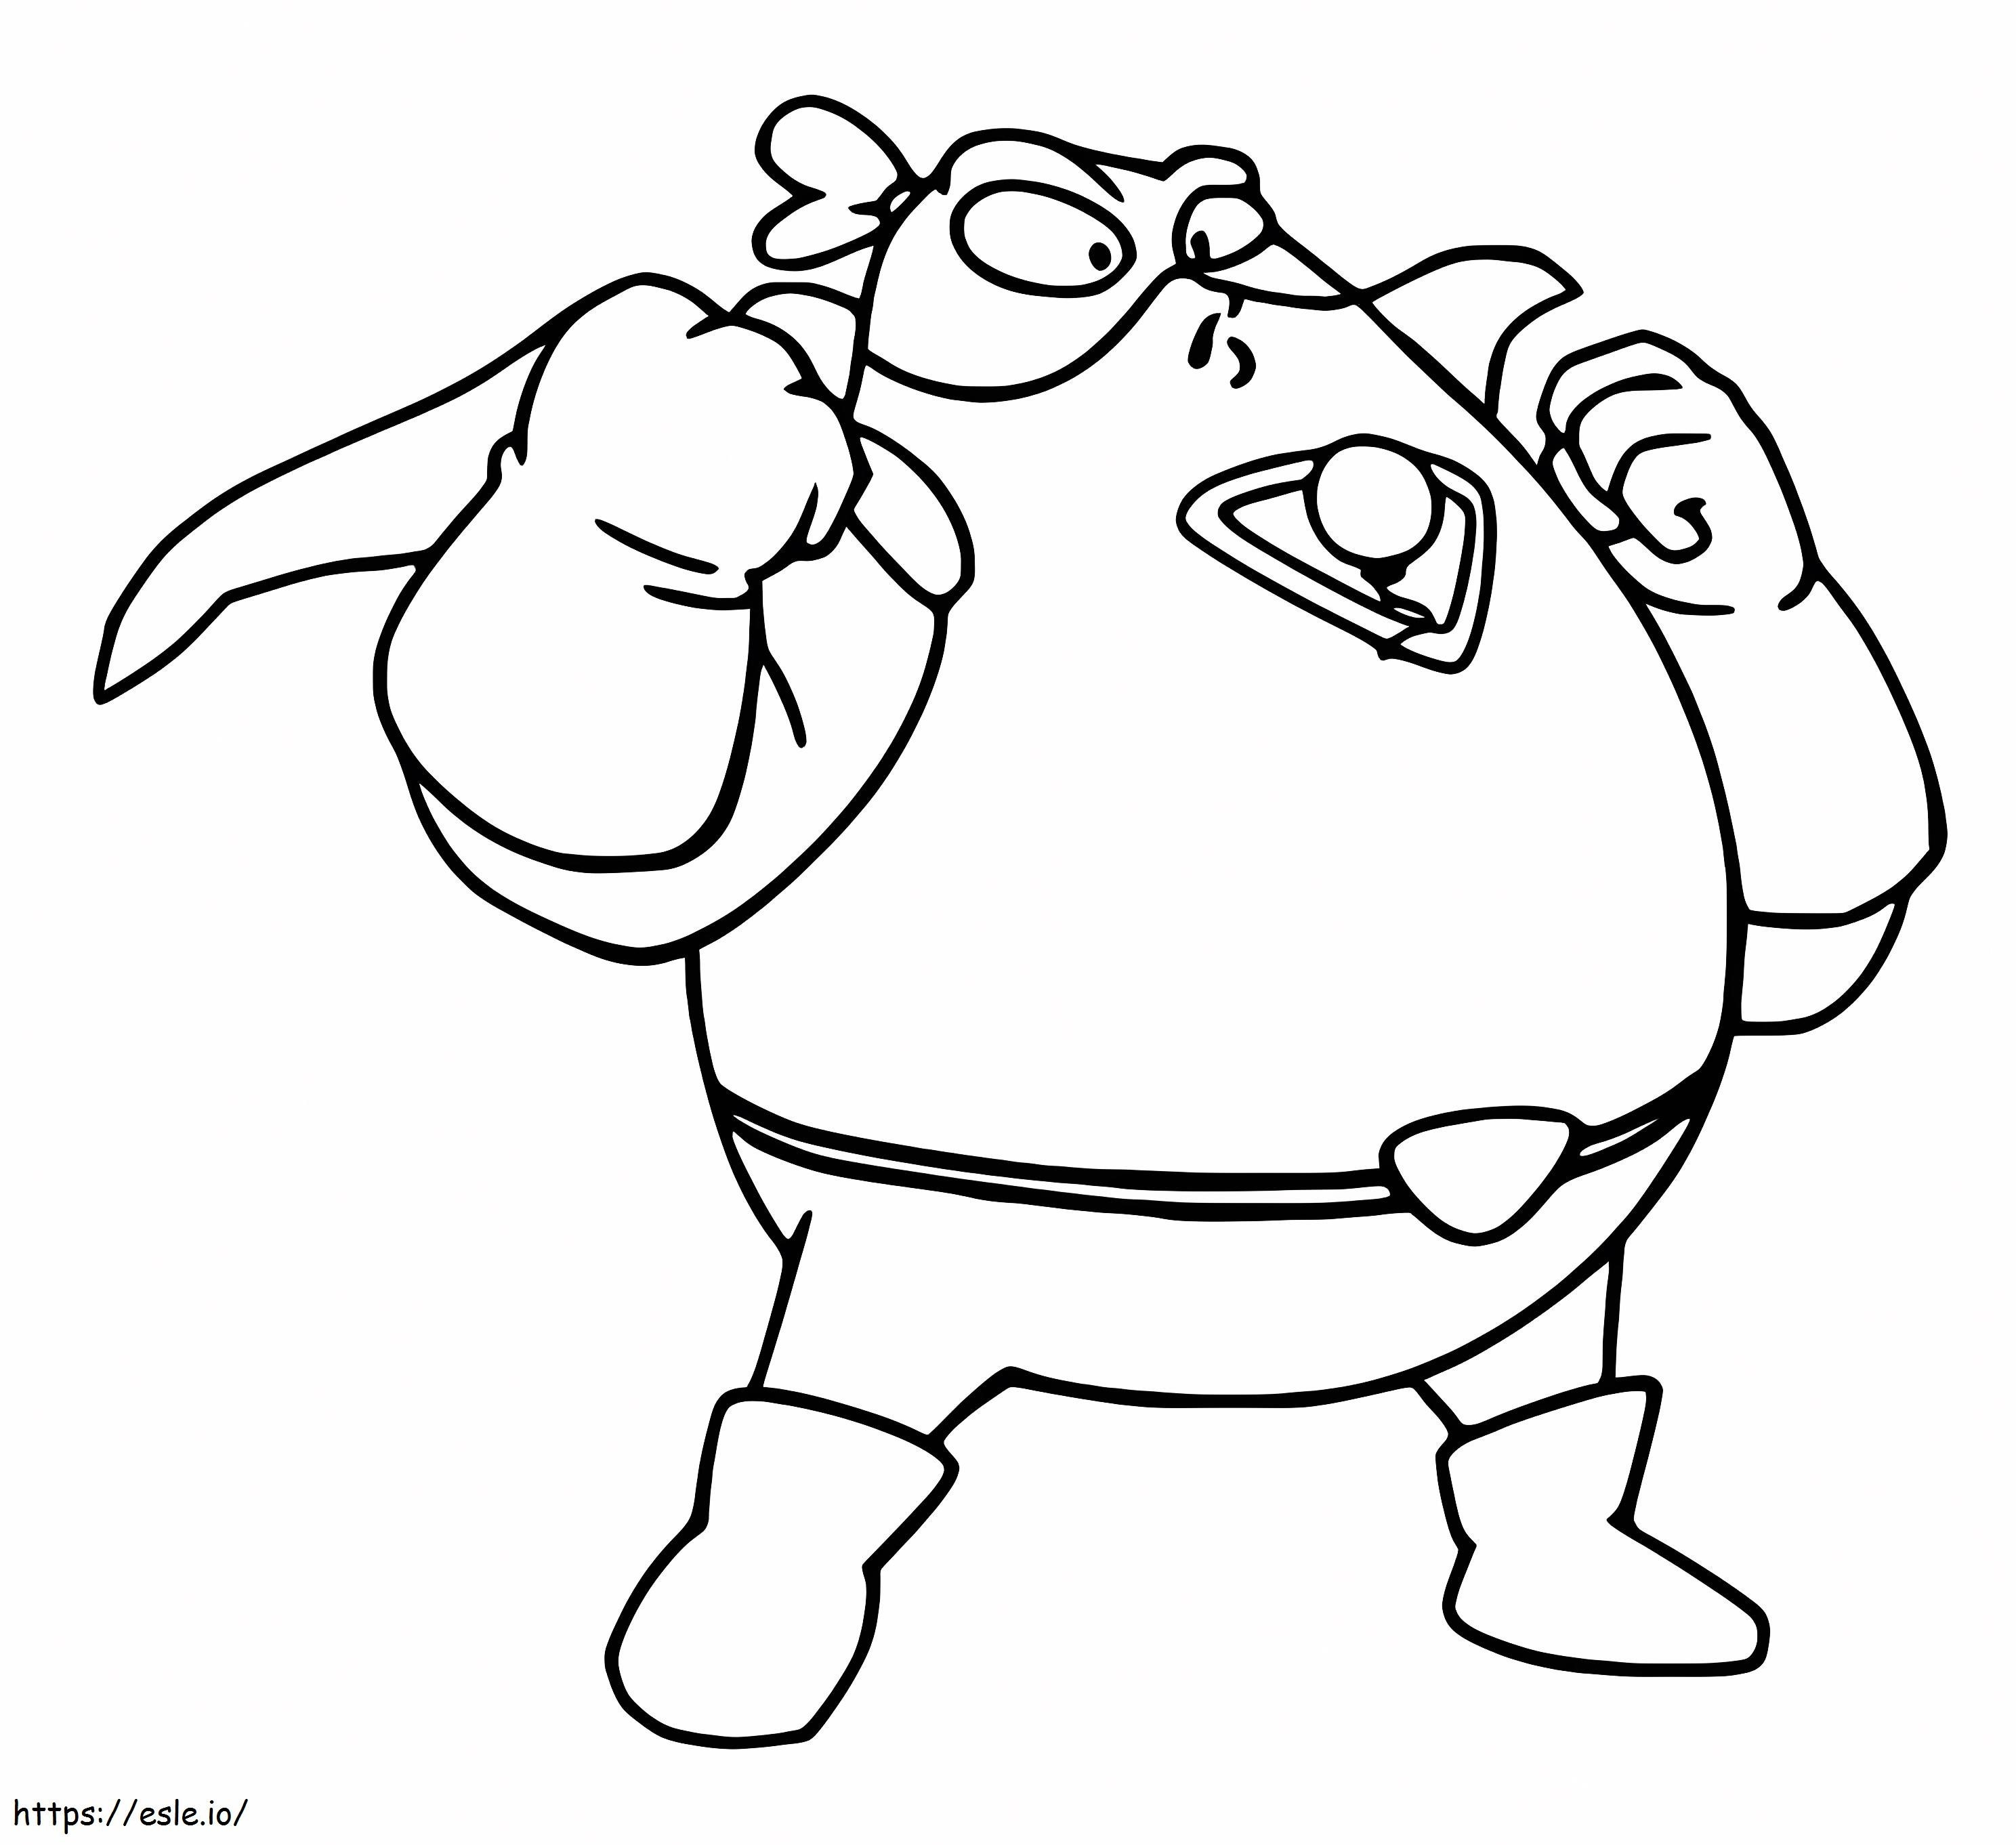 Airblast Superzings coloring page